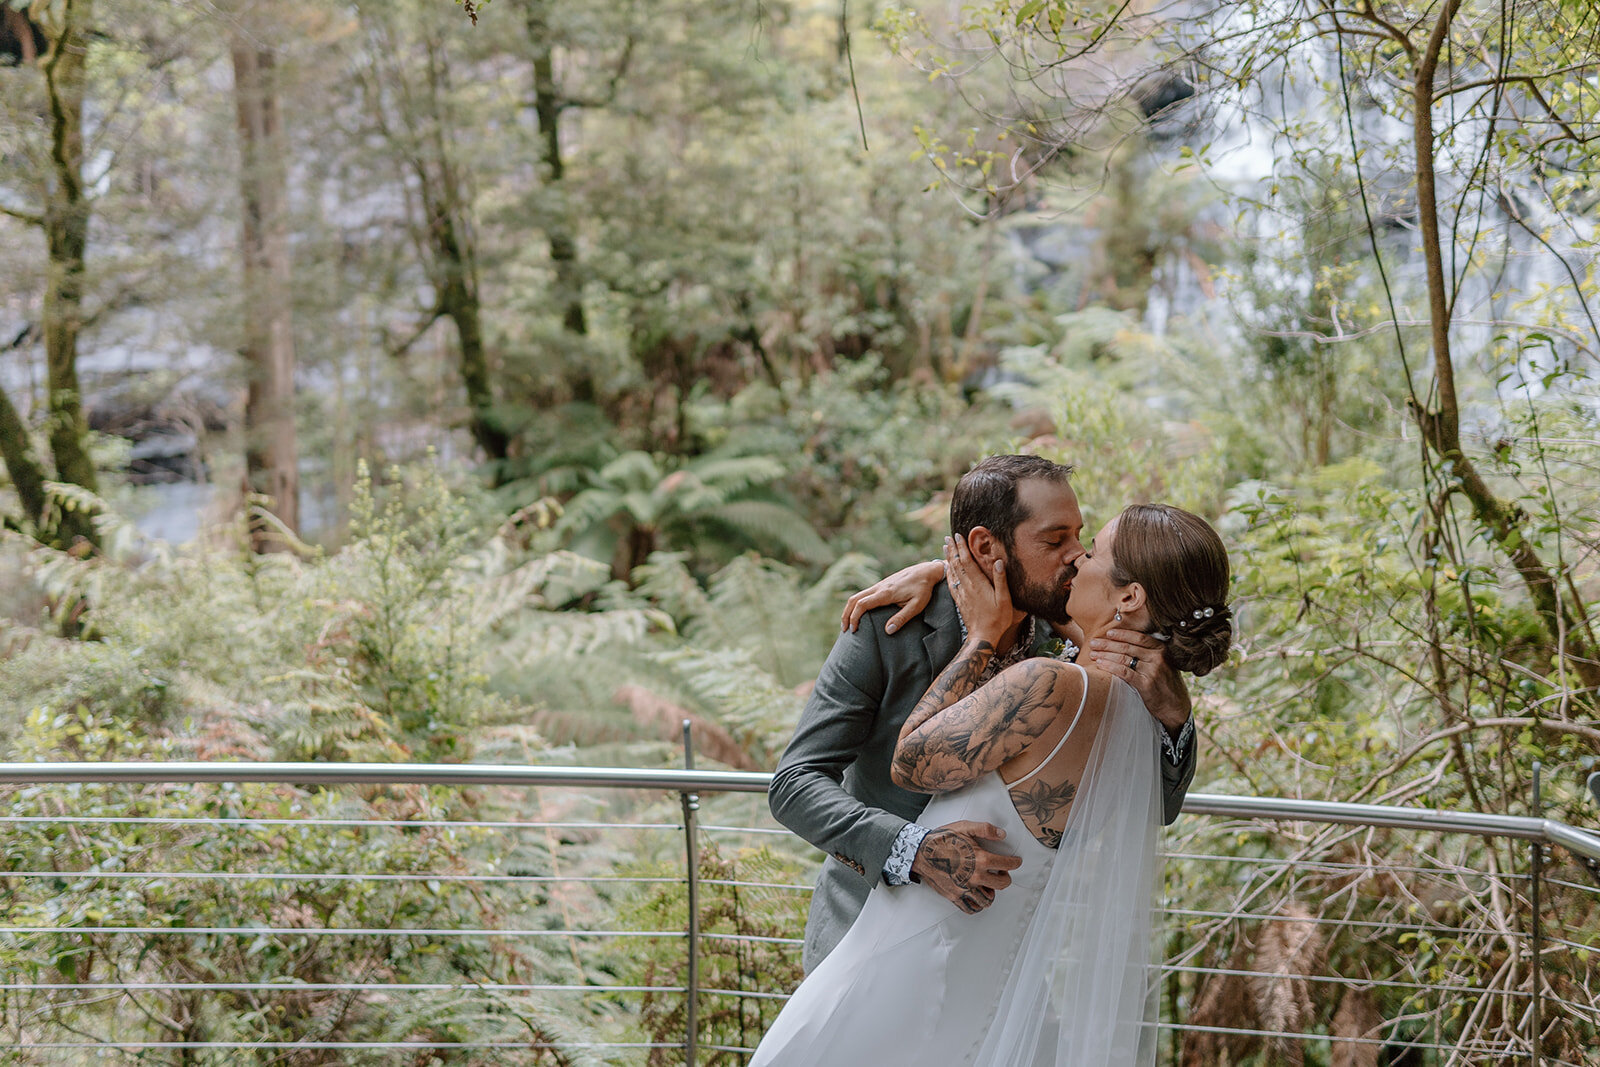 Stacey&Cory-Coast&Pines-181